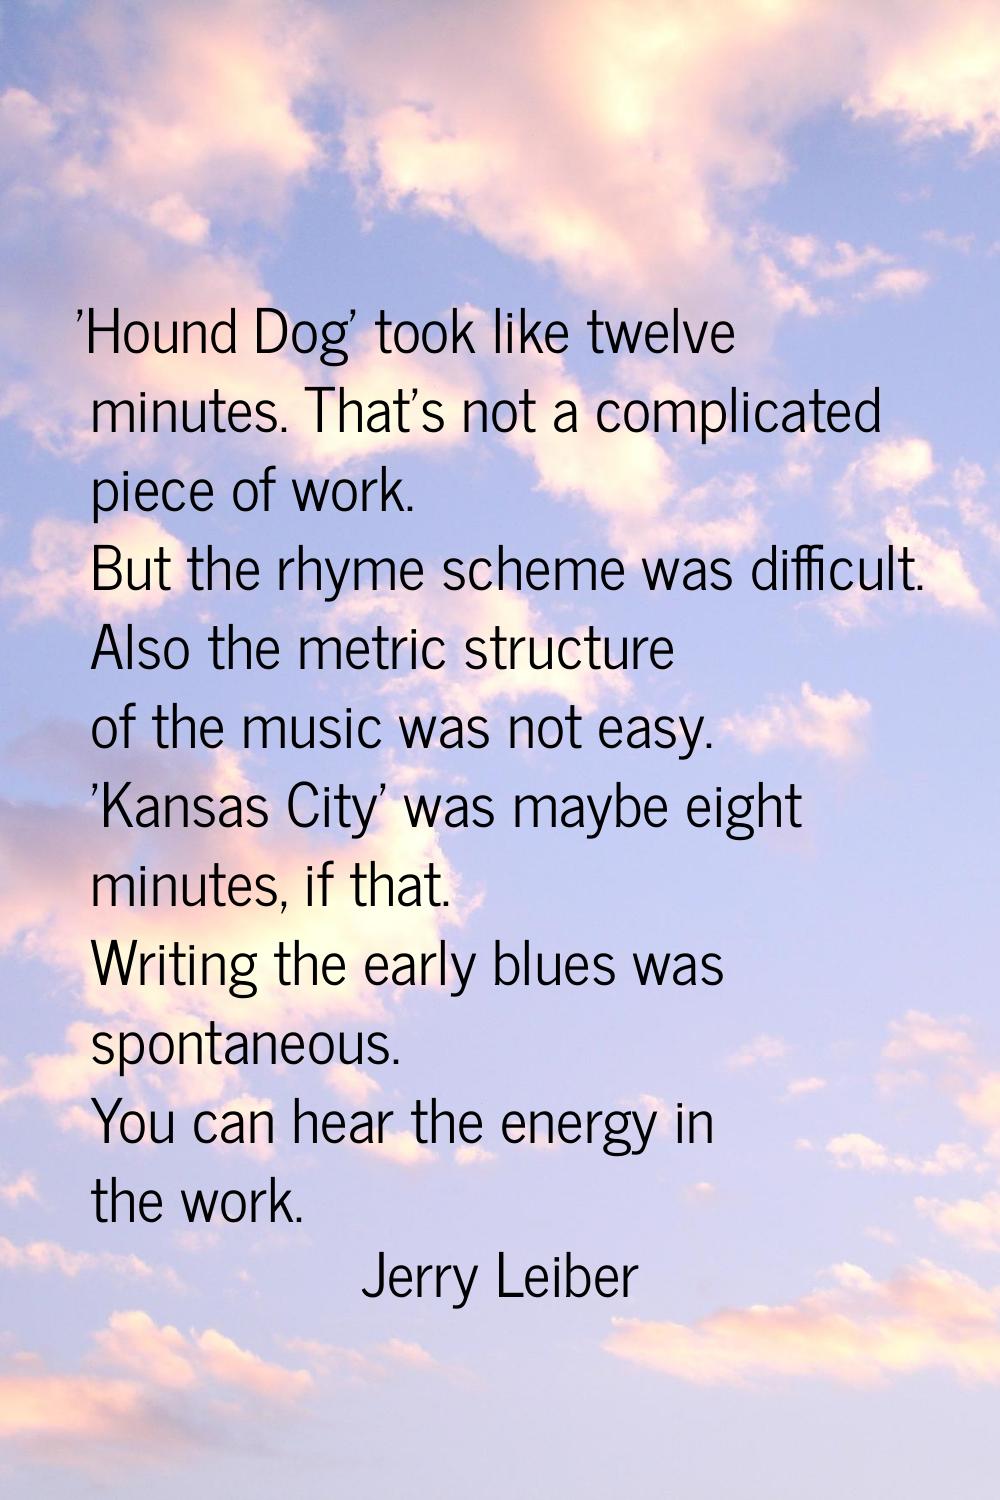 'Hound Dog' took like twelve minutes. That's not a complicated piece of work. But the rhyme scheme 